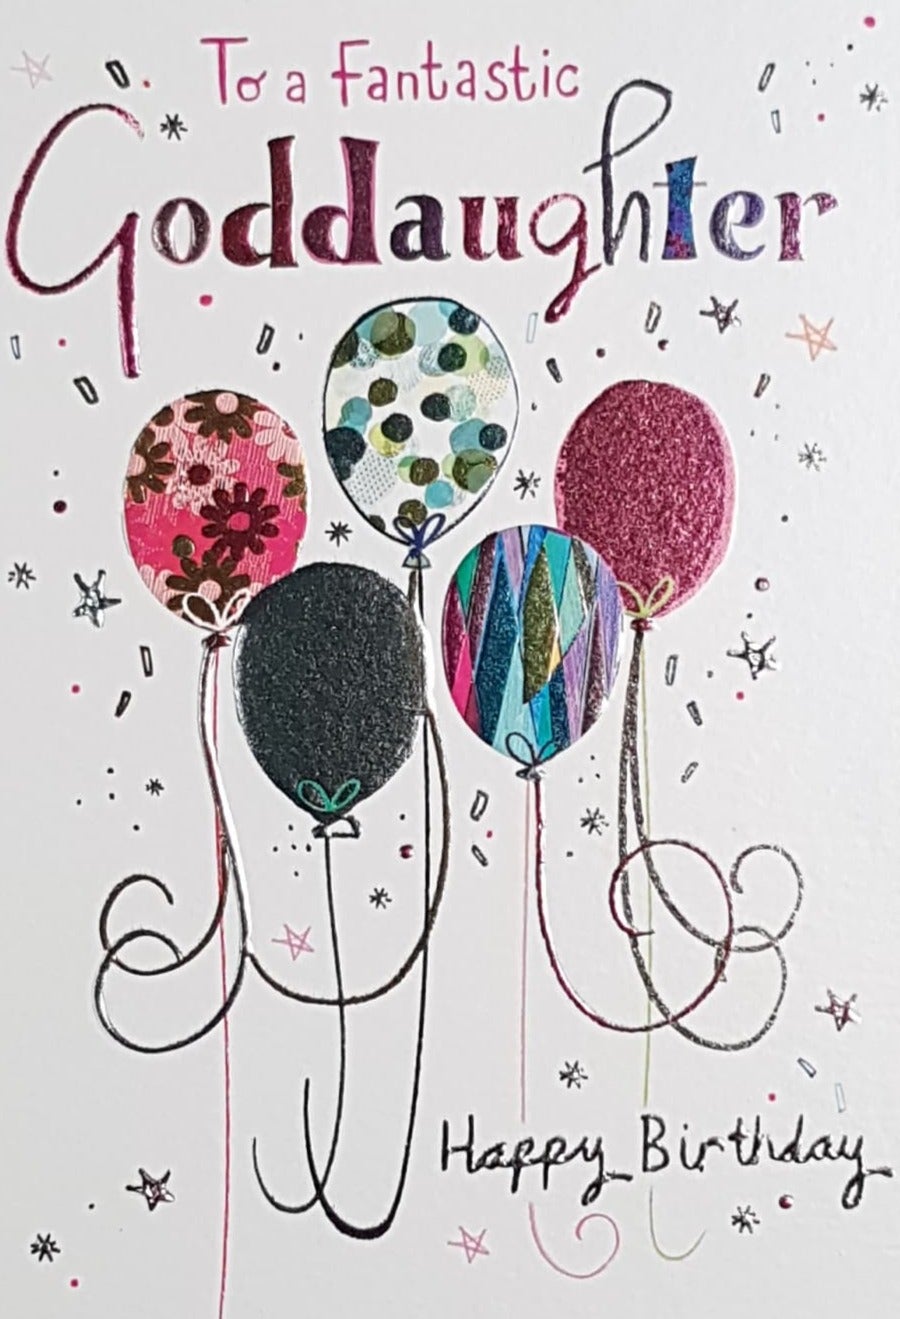 Birthday Card - Goddaughter / A Colourful Shiny Font & Balloons